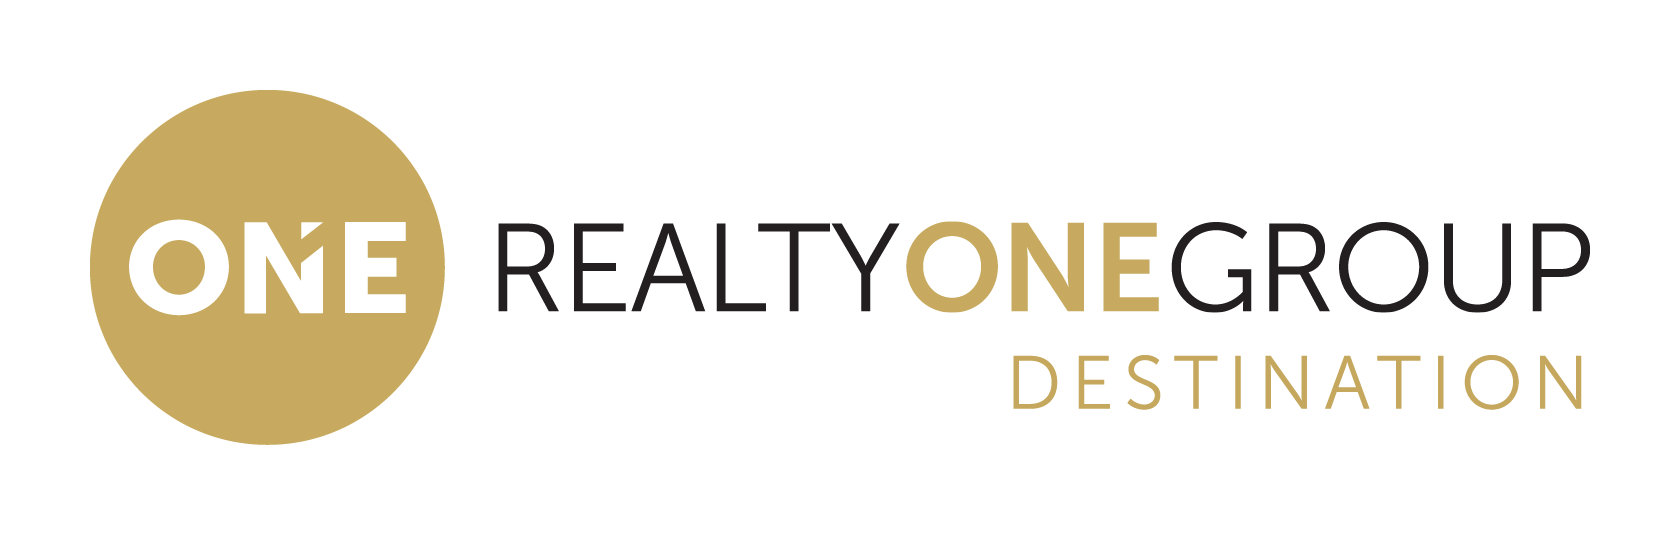 Realty ONE Group Destination